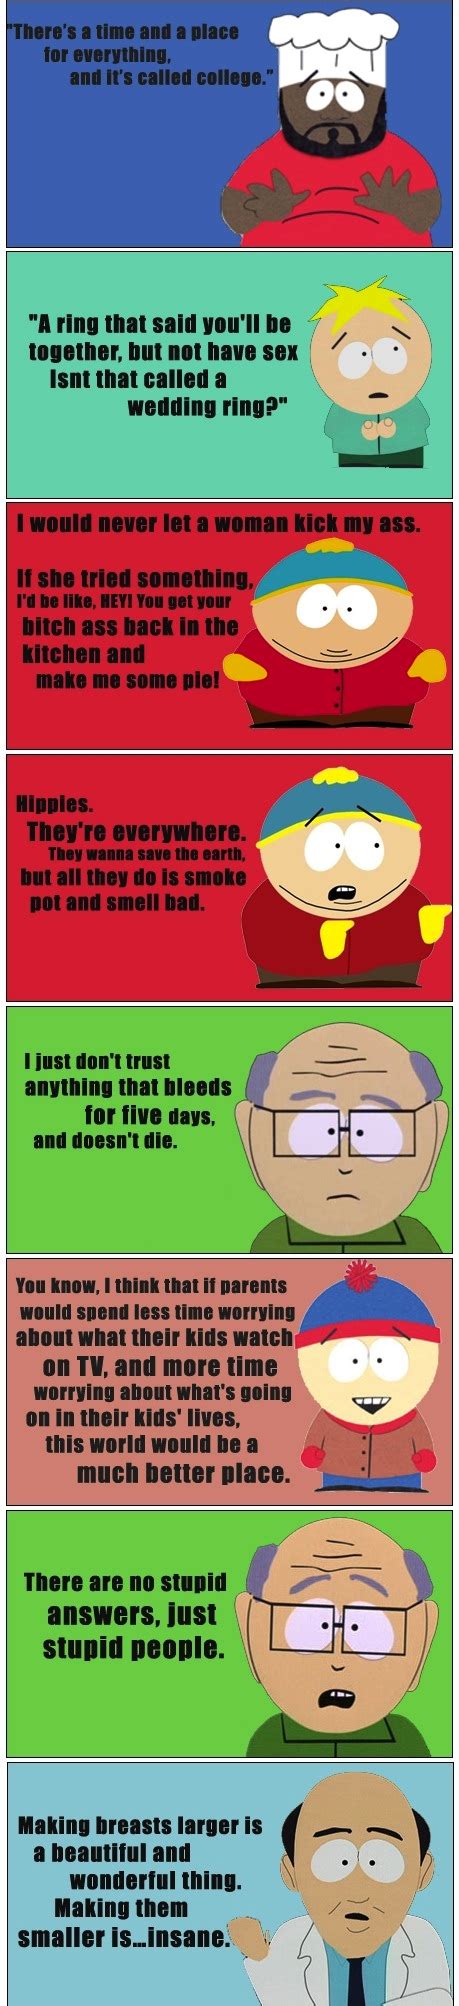 Funny South Park Quotes Funny Pictures Quotes Pics Photos Images